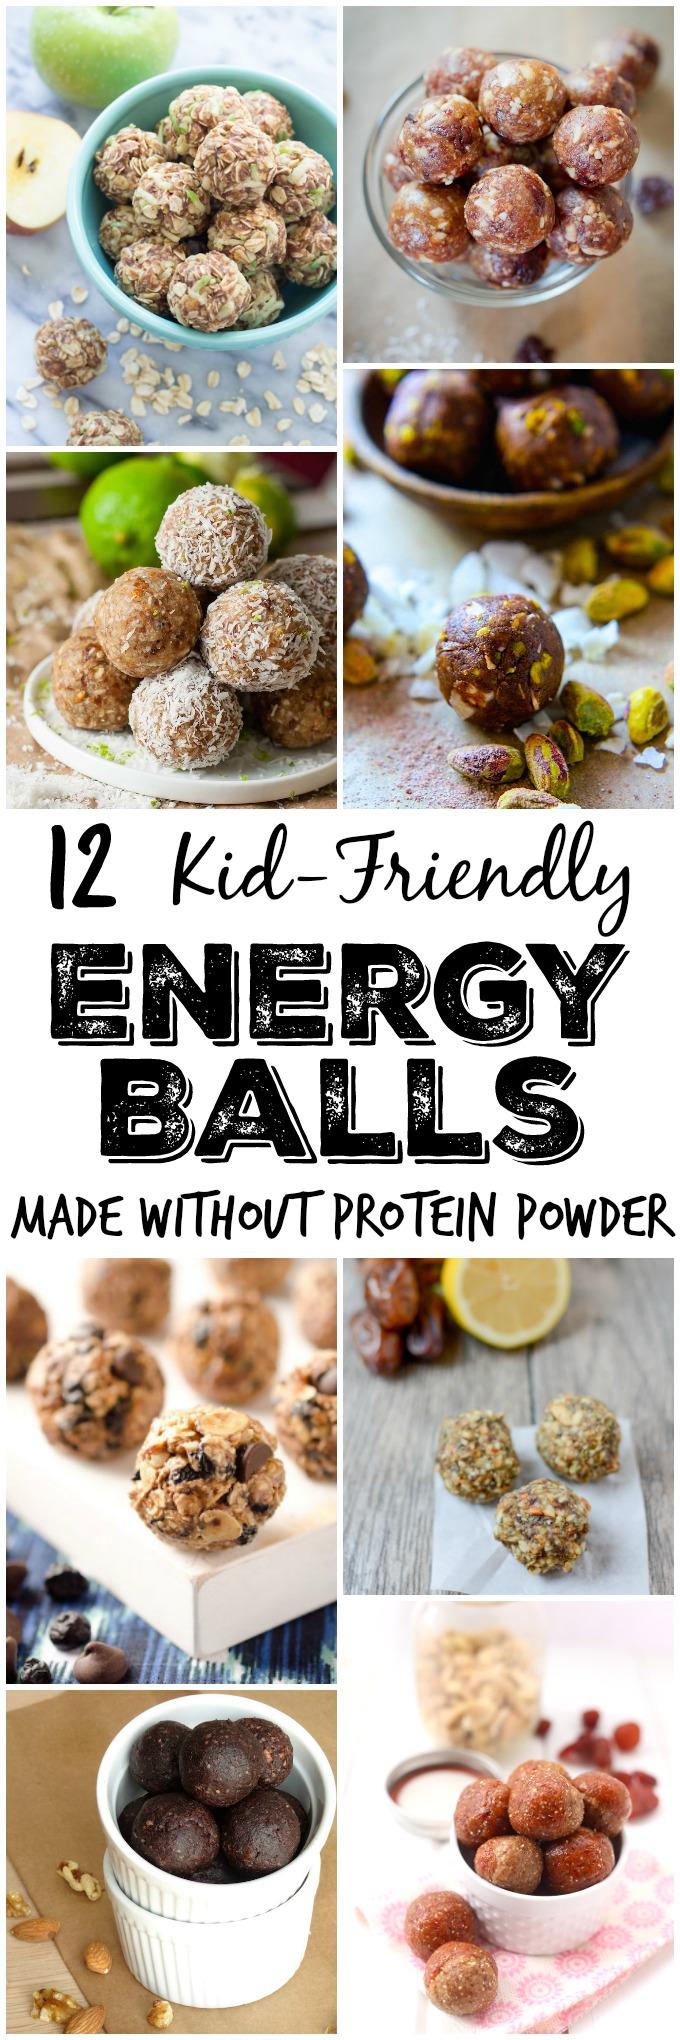 Looking for a quick, healthy snack made with real food ingredients? Here are 12 kid-friendly energy ball recipes made without protein powder.